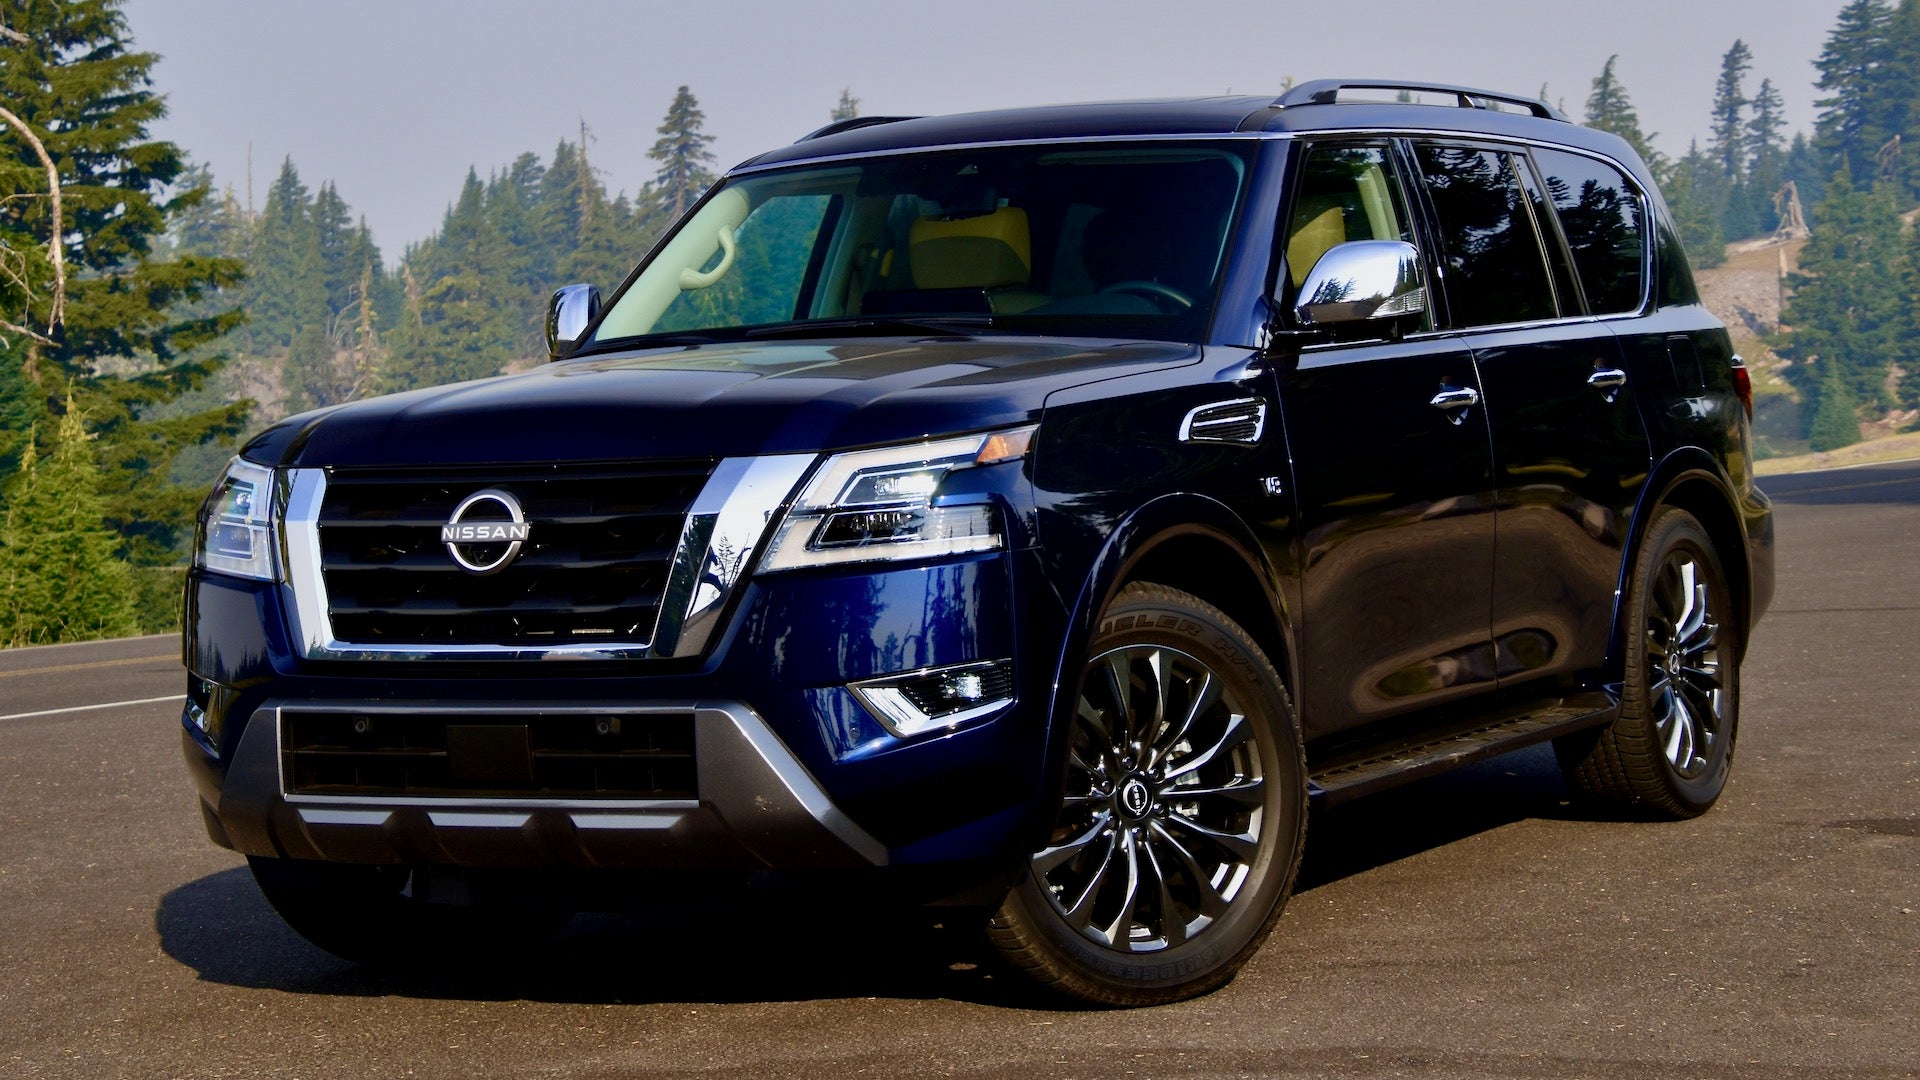 2021 Nissan Armada Review: Truckin' With More Tech